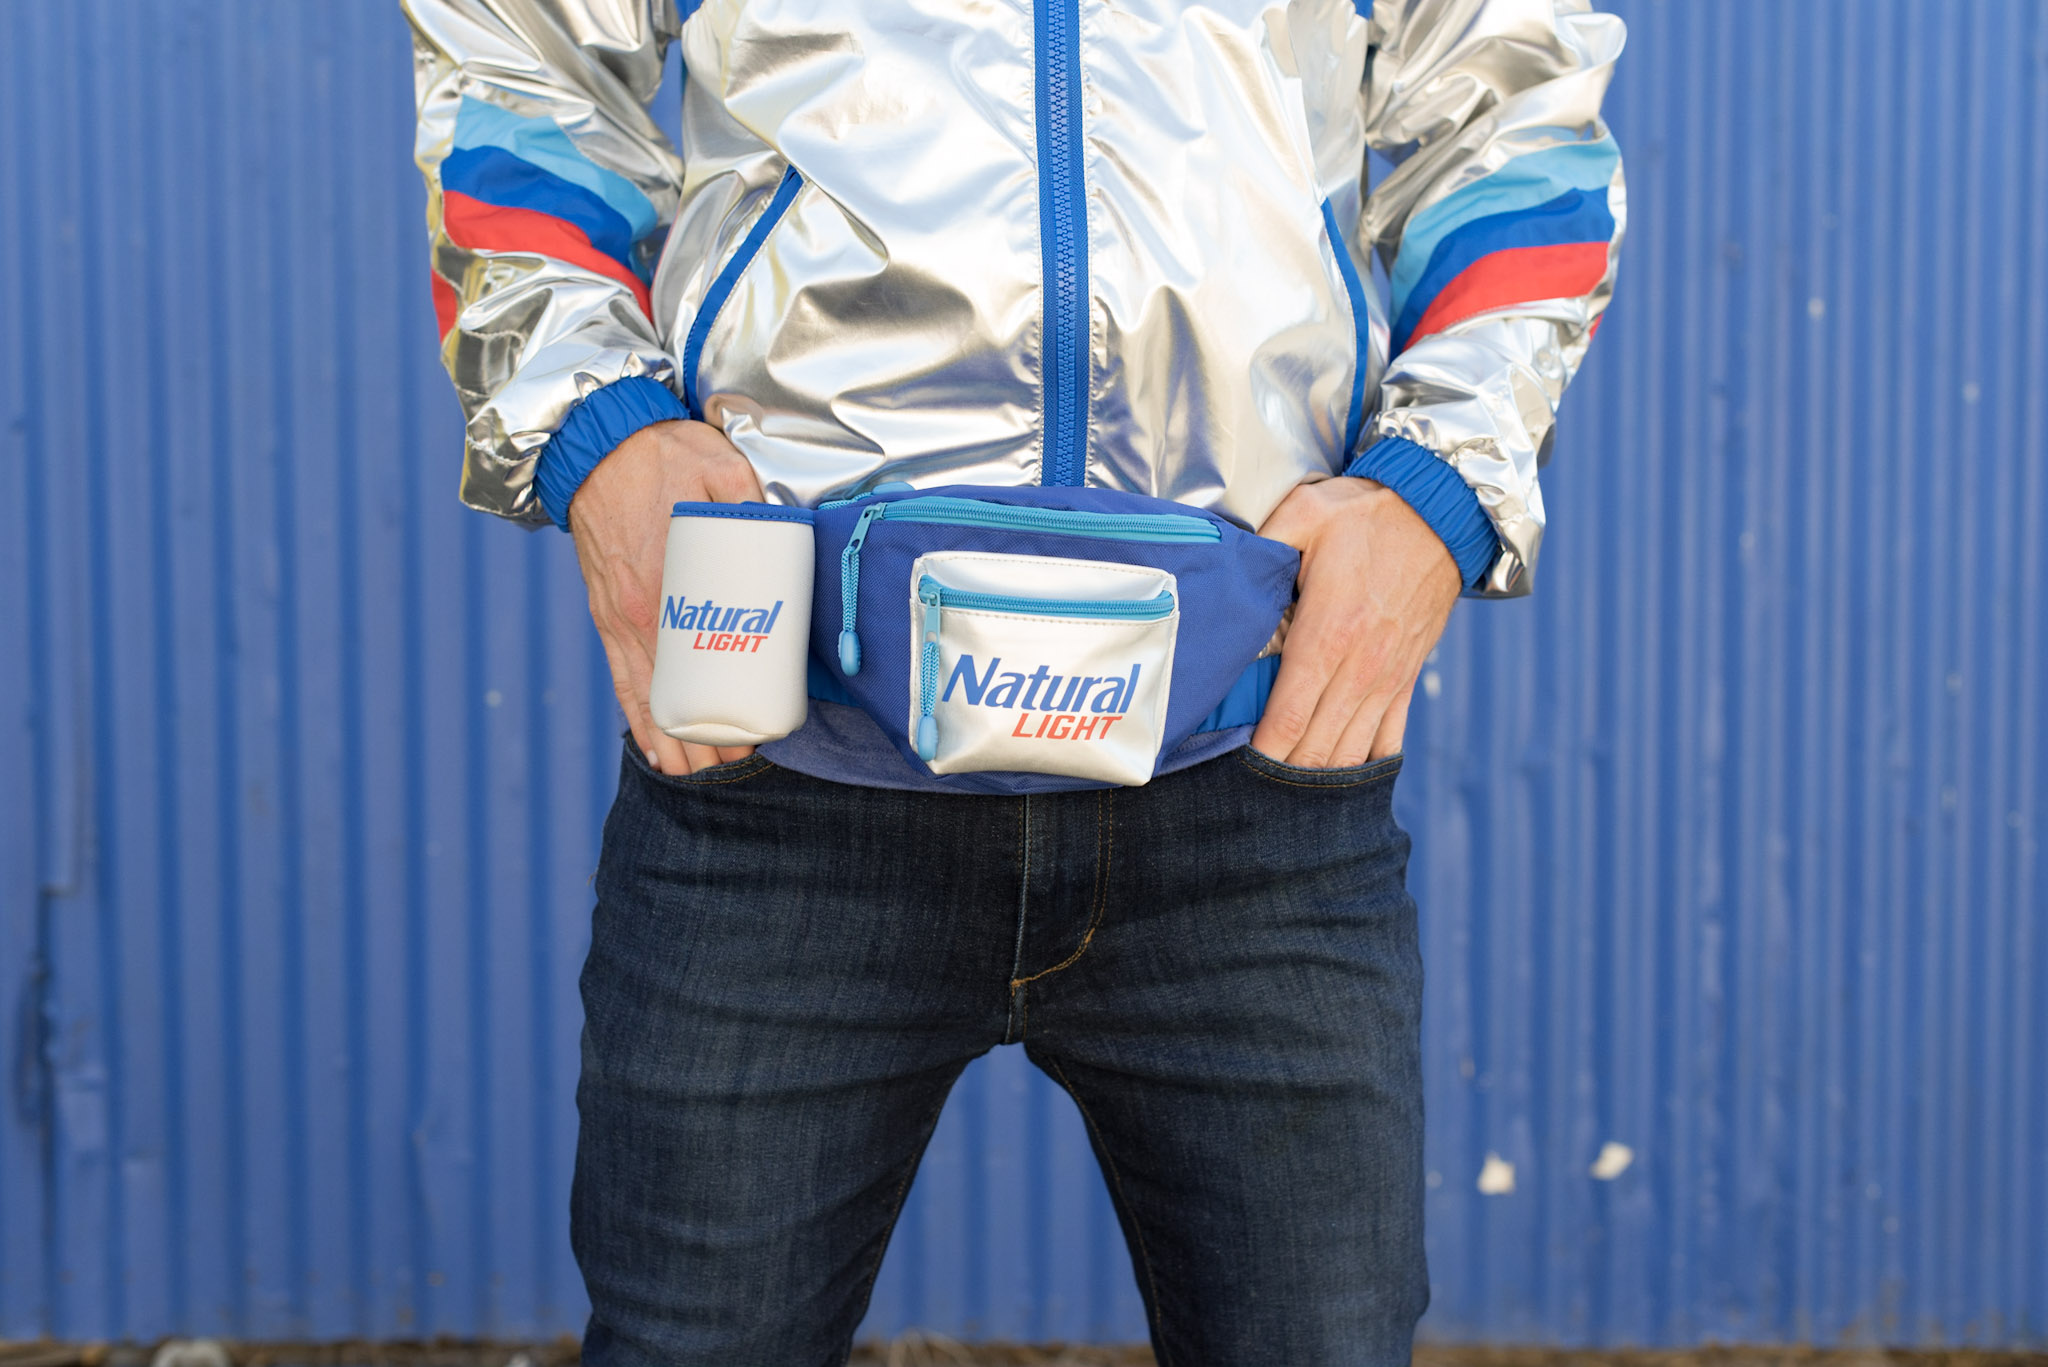 If You Love Natty Light You Need This Absurd Natty Light Attire In 